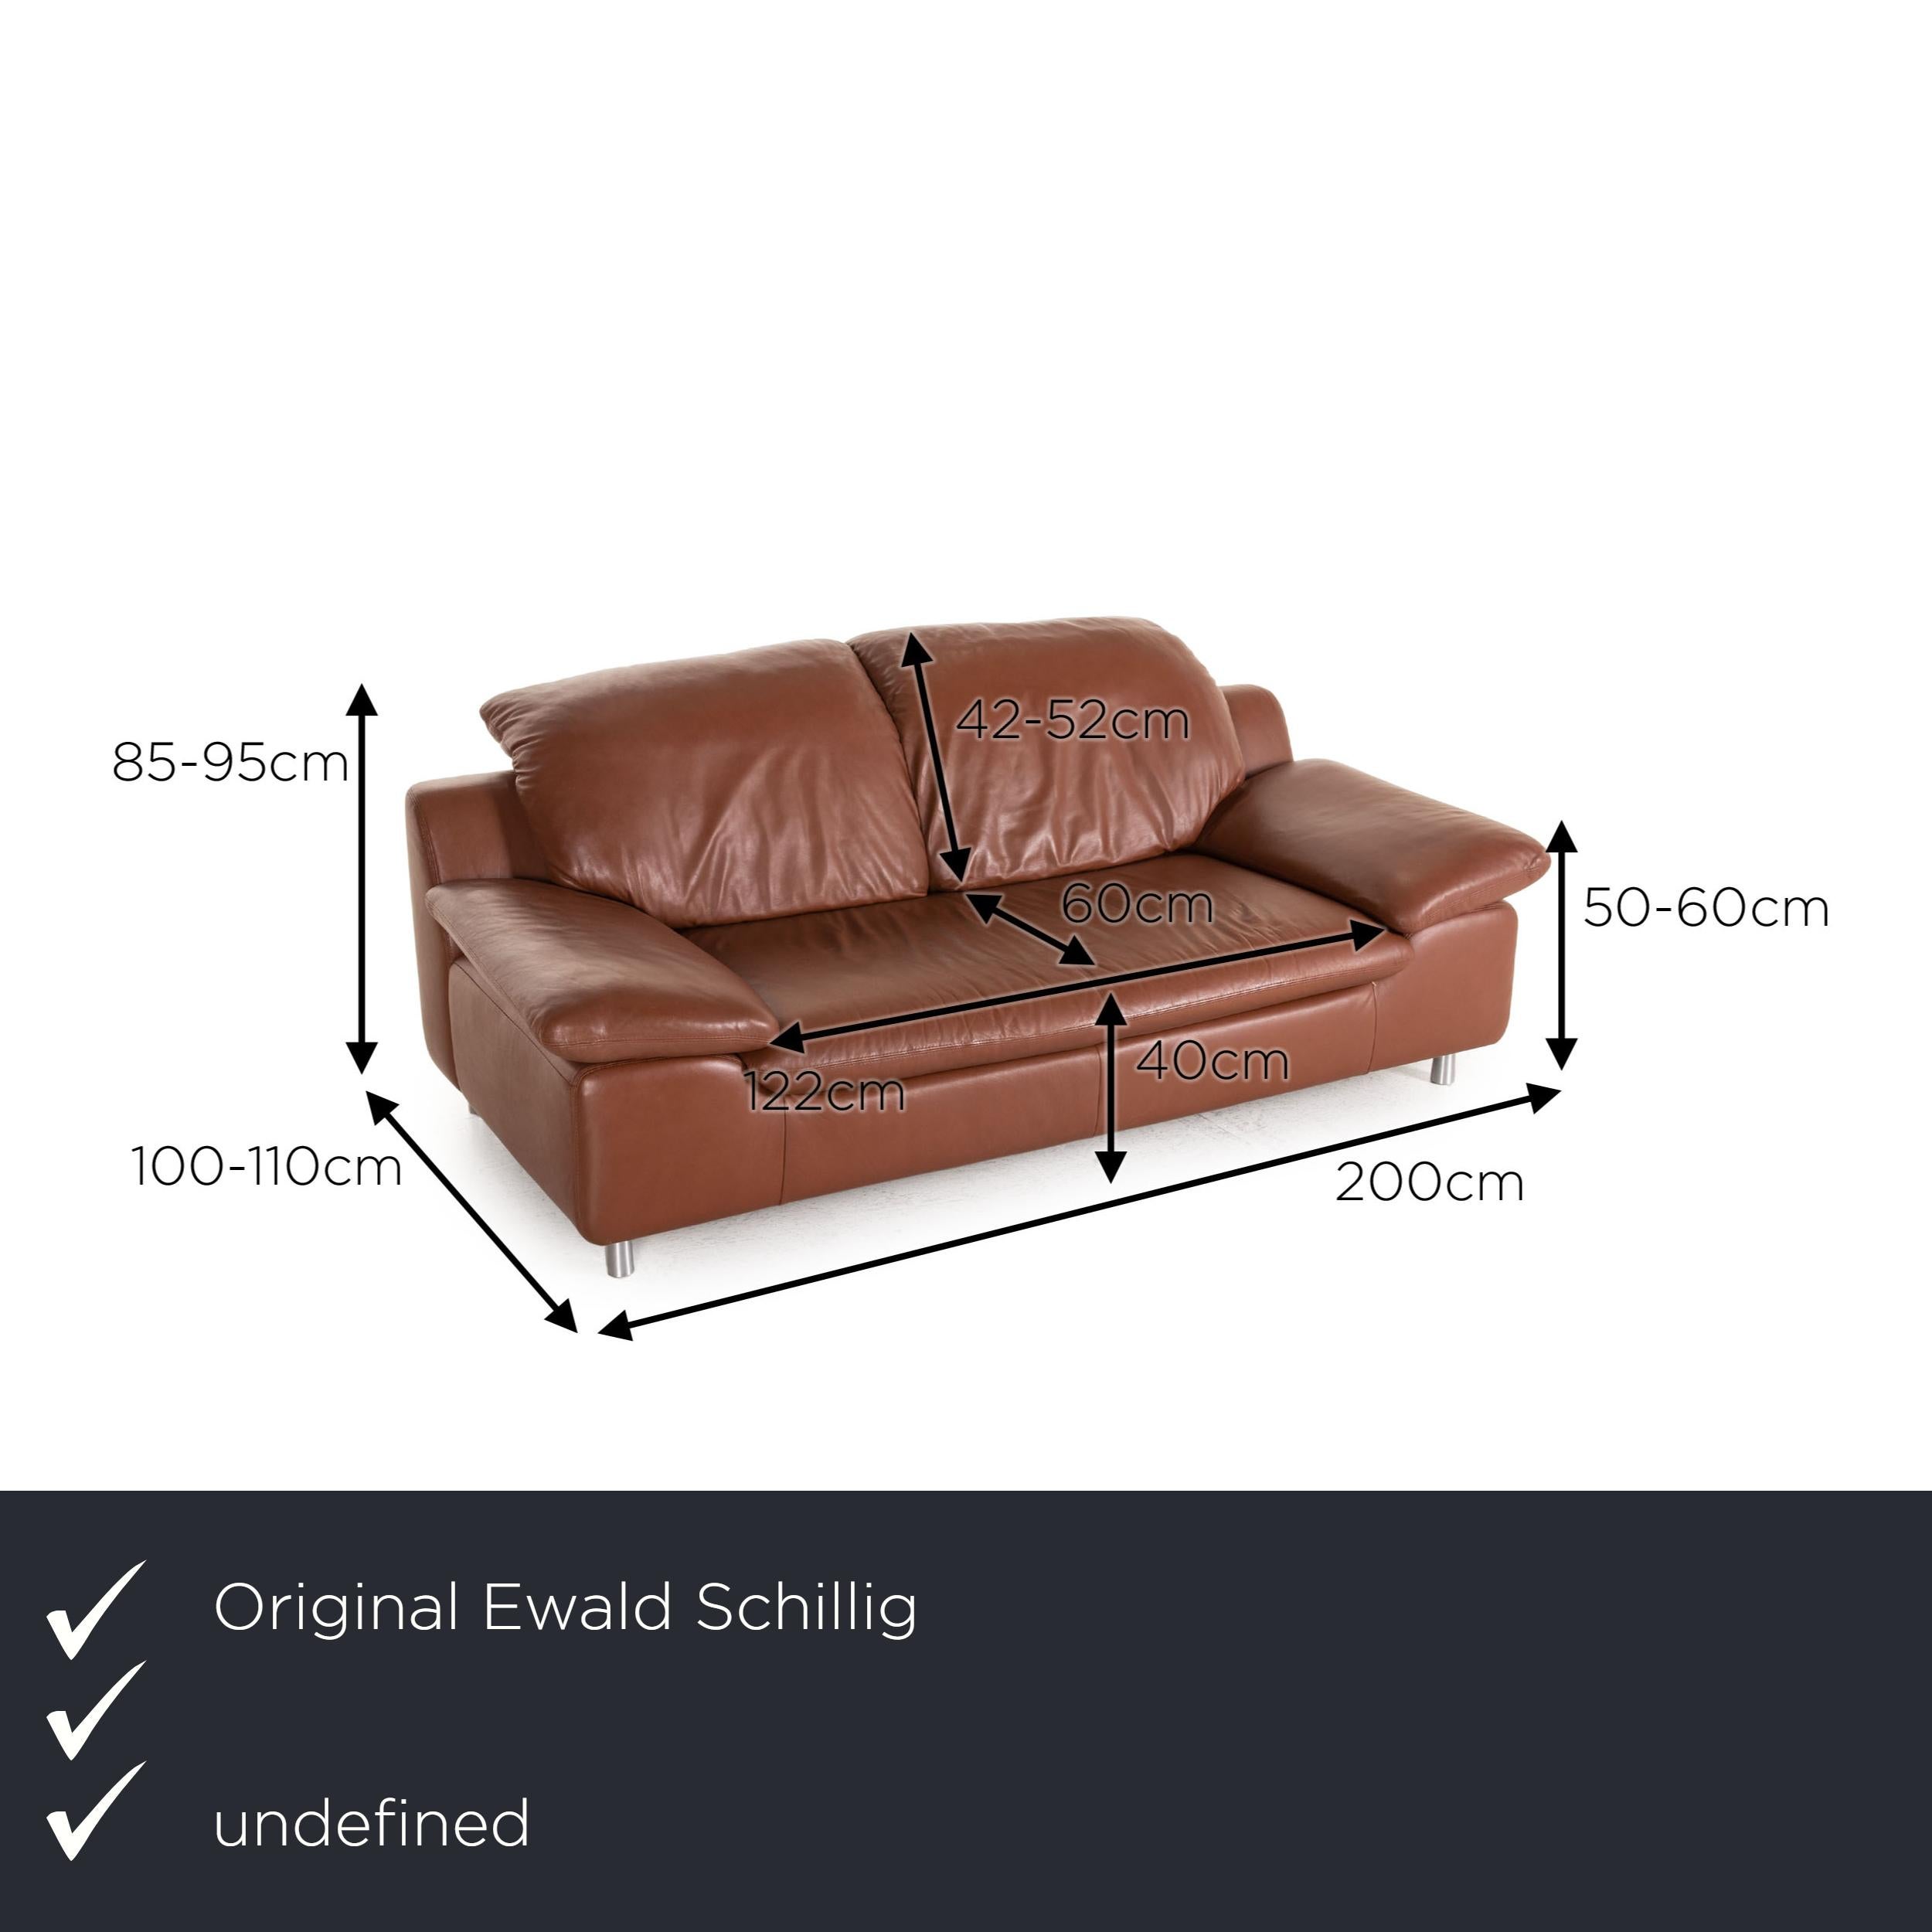 We present to you an Ewald Schillig leather sofa brown two-seater couch.

Product measurements in centimeters:

depth: 100
width: 200
height: 85
seat height: 40
rest height: 50
seat depth: 60
seat width: 122
back height: 42.

 